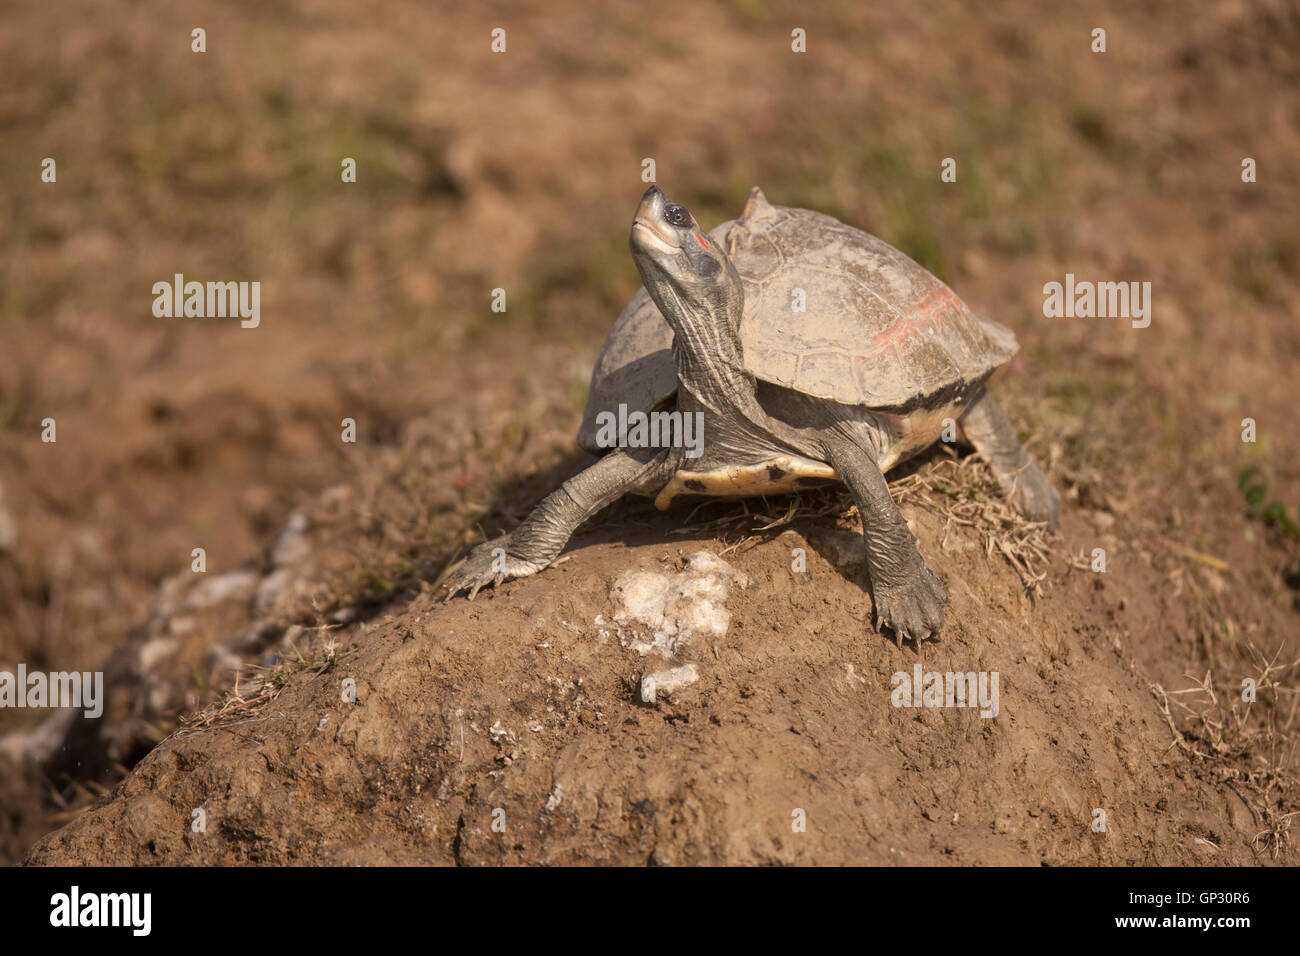 Red crowned roof turtle on the river bank in Chambal on the Madhya Pradesh Uttar Pradesh border in India Stock Photo